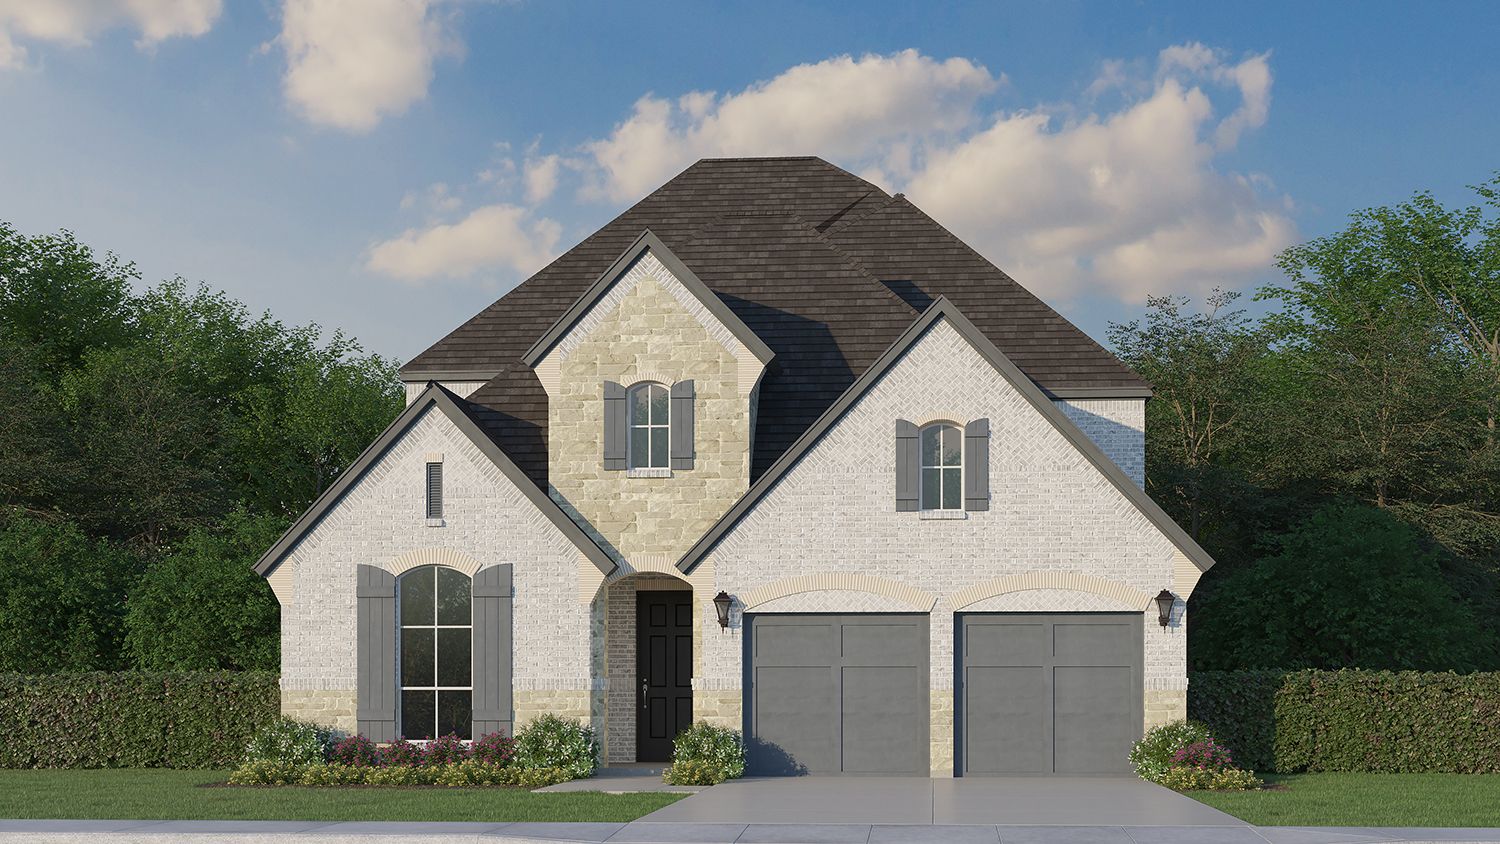 Exterior:Plan 1572 Elevation A w/ Stone